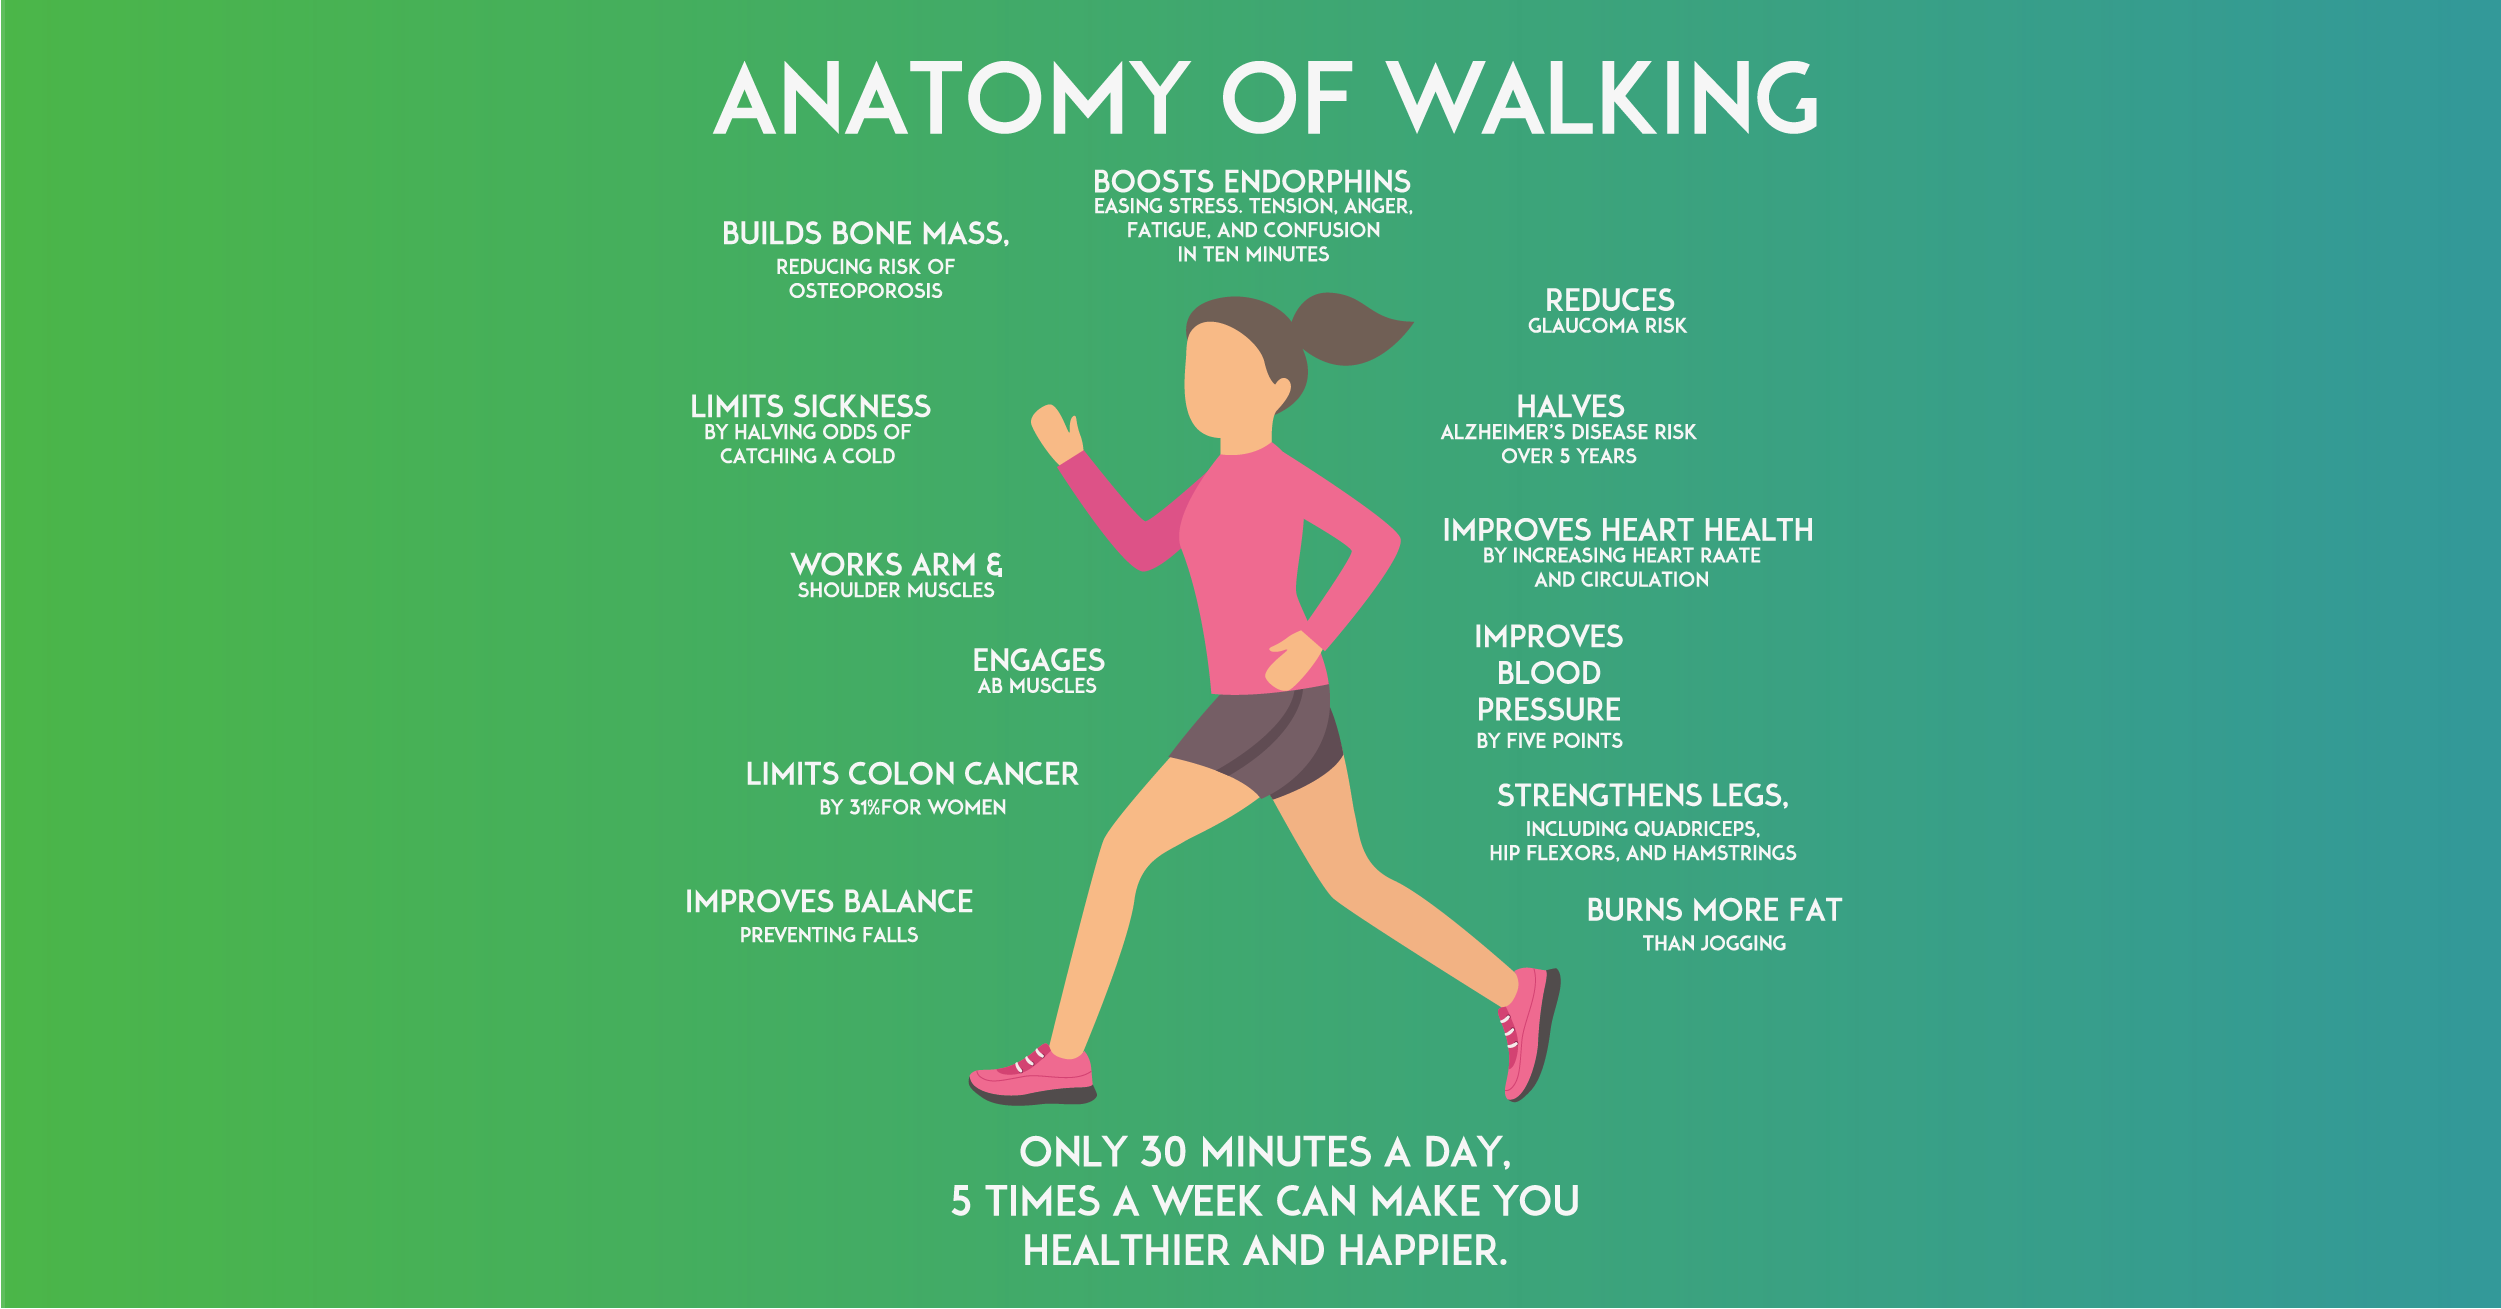 Walking with Weights: Benefits, Risks, Sample Workout